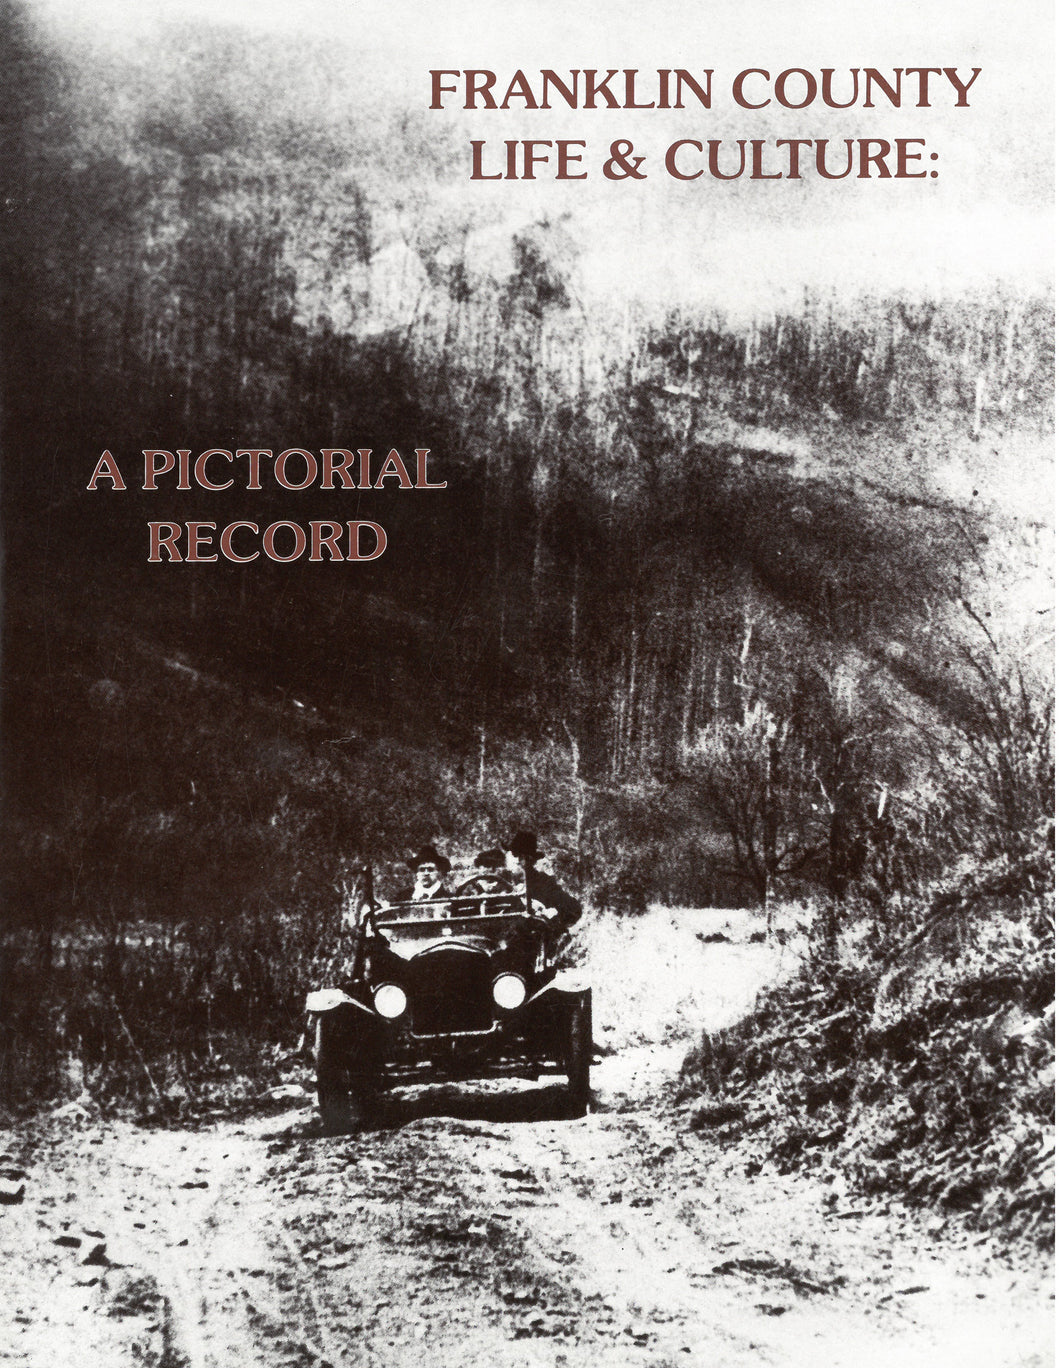 Franklin County Life & Culture: A Pictorial Record